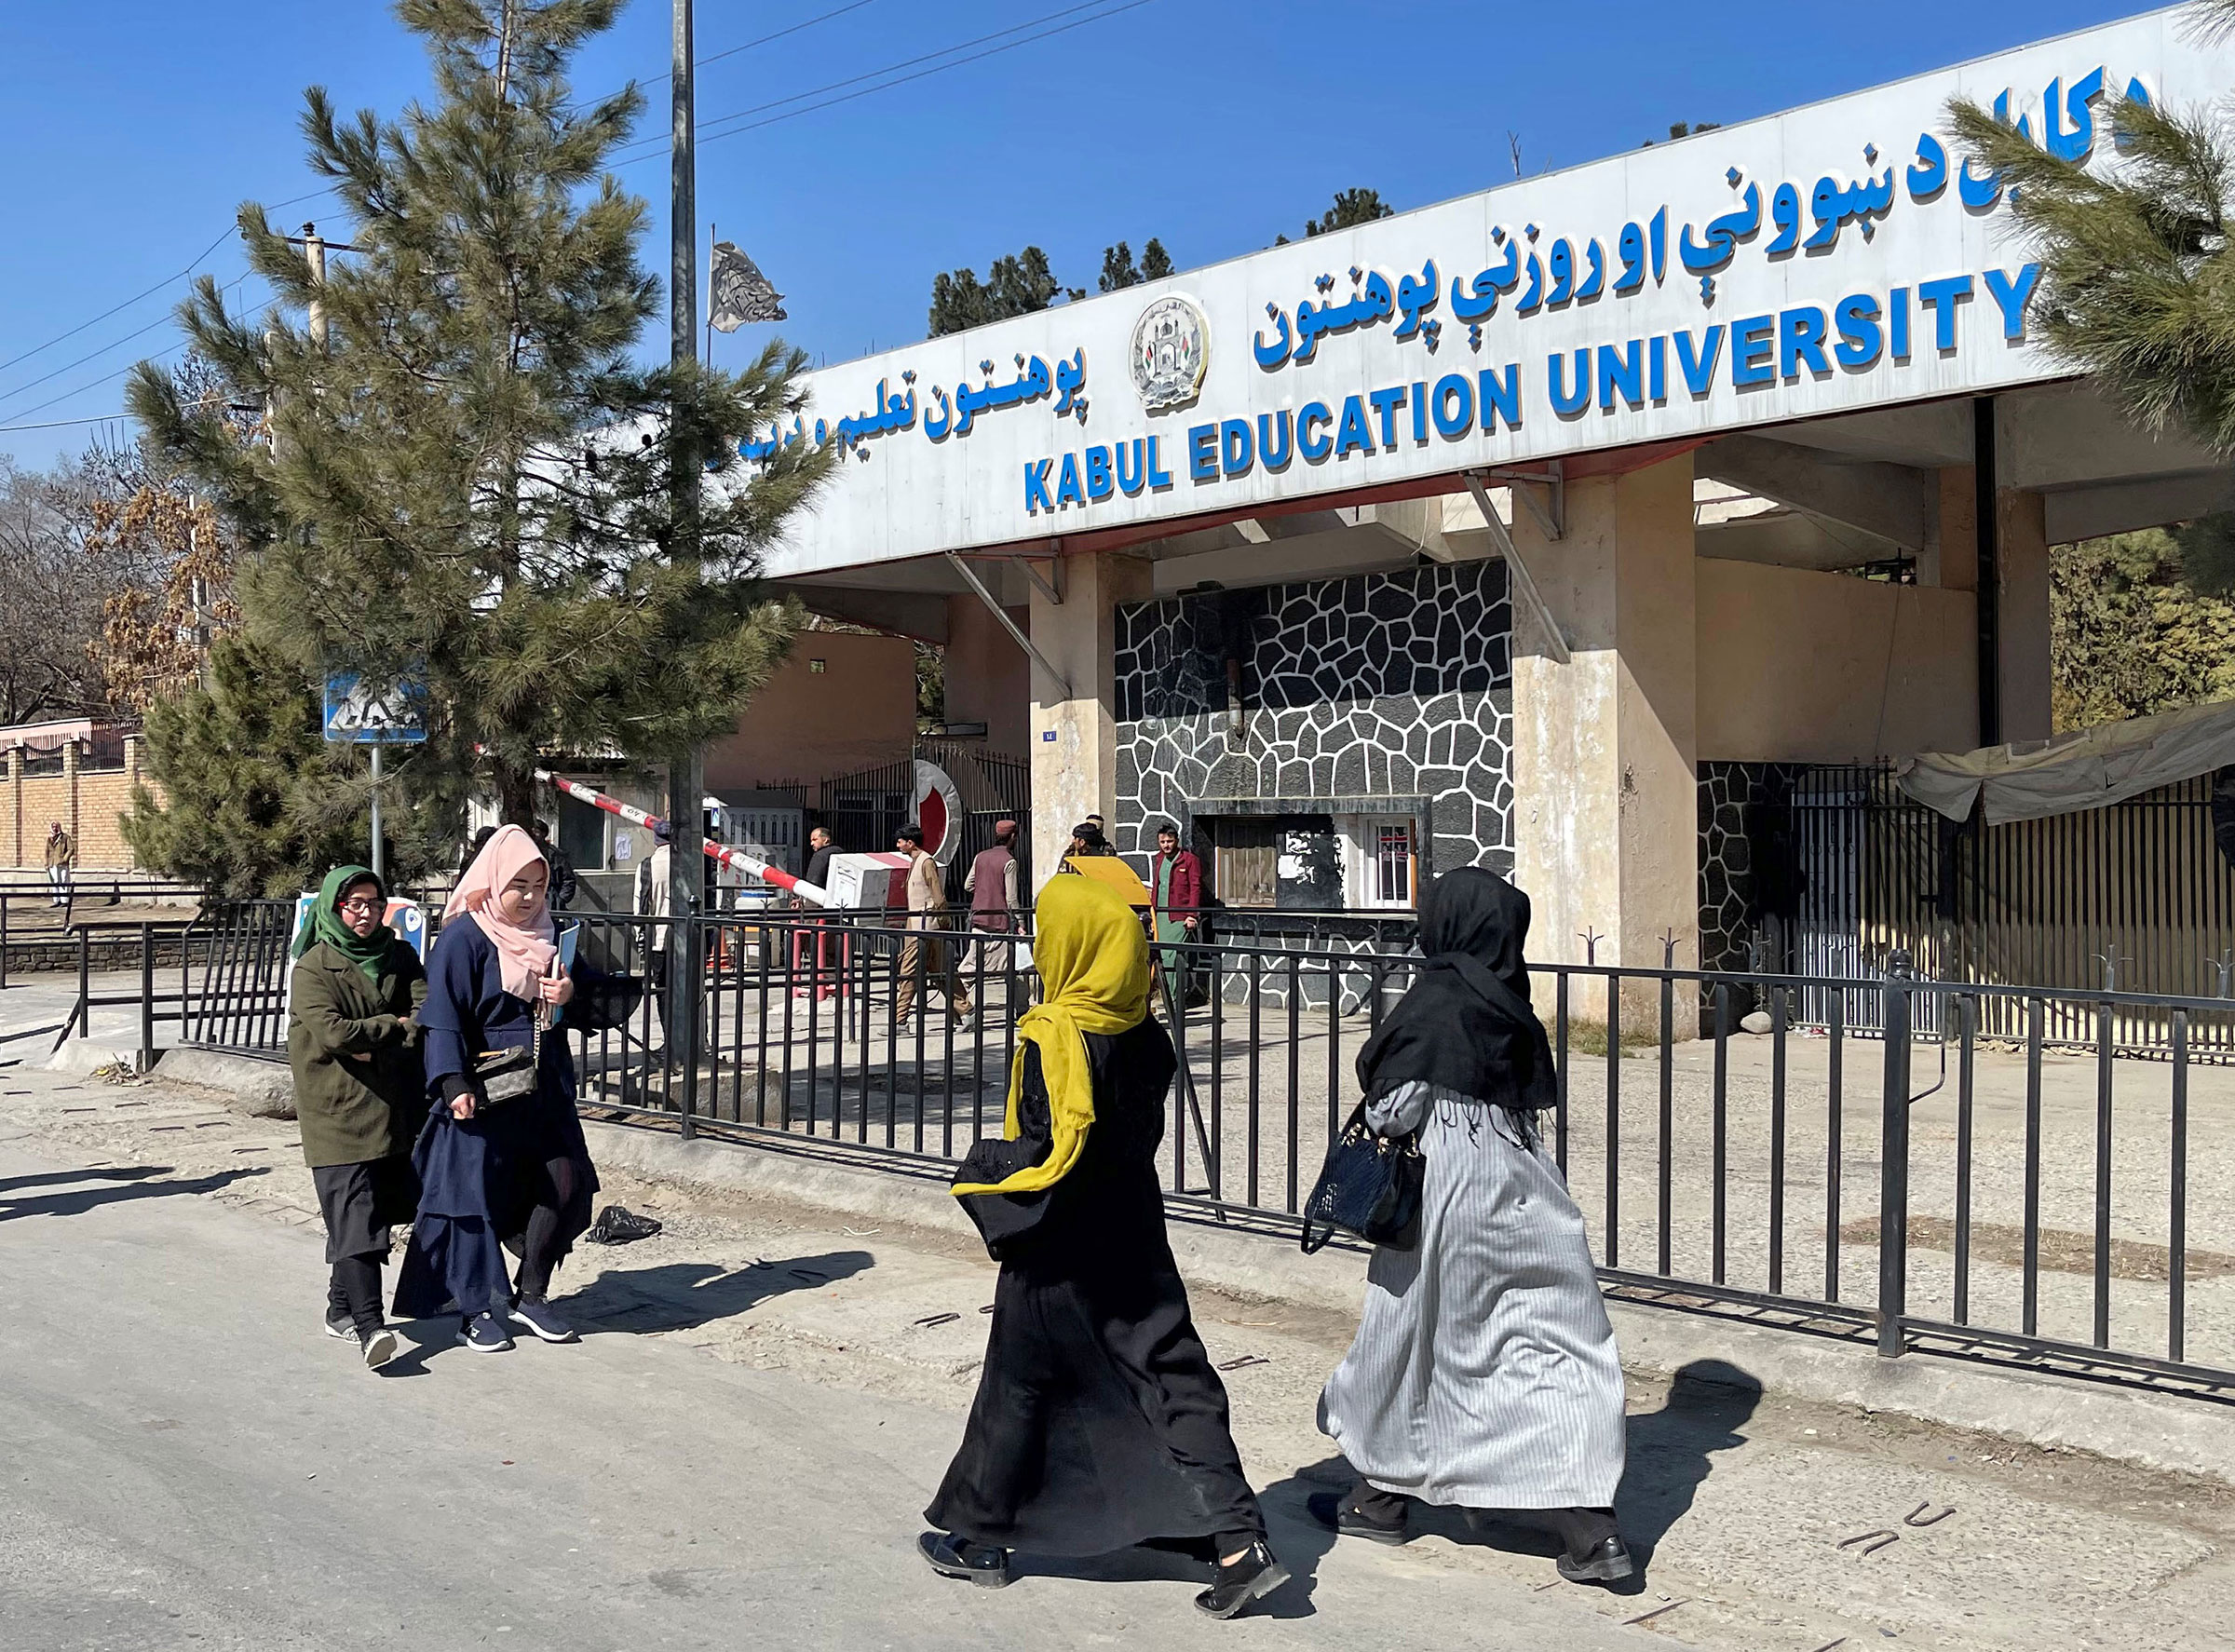 Female students walk in front of the Kabul Education University in Kabul, Feb. 26, 2022.